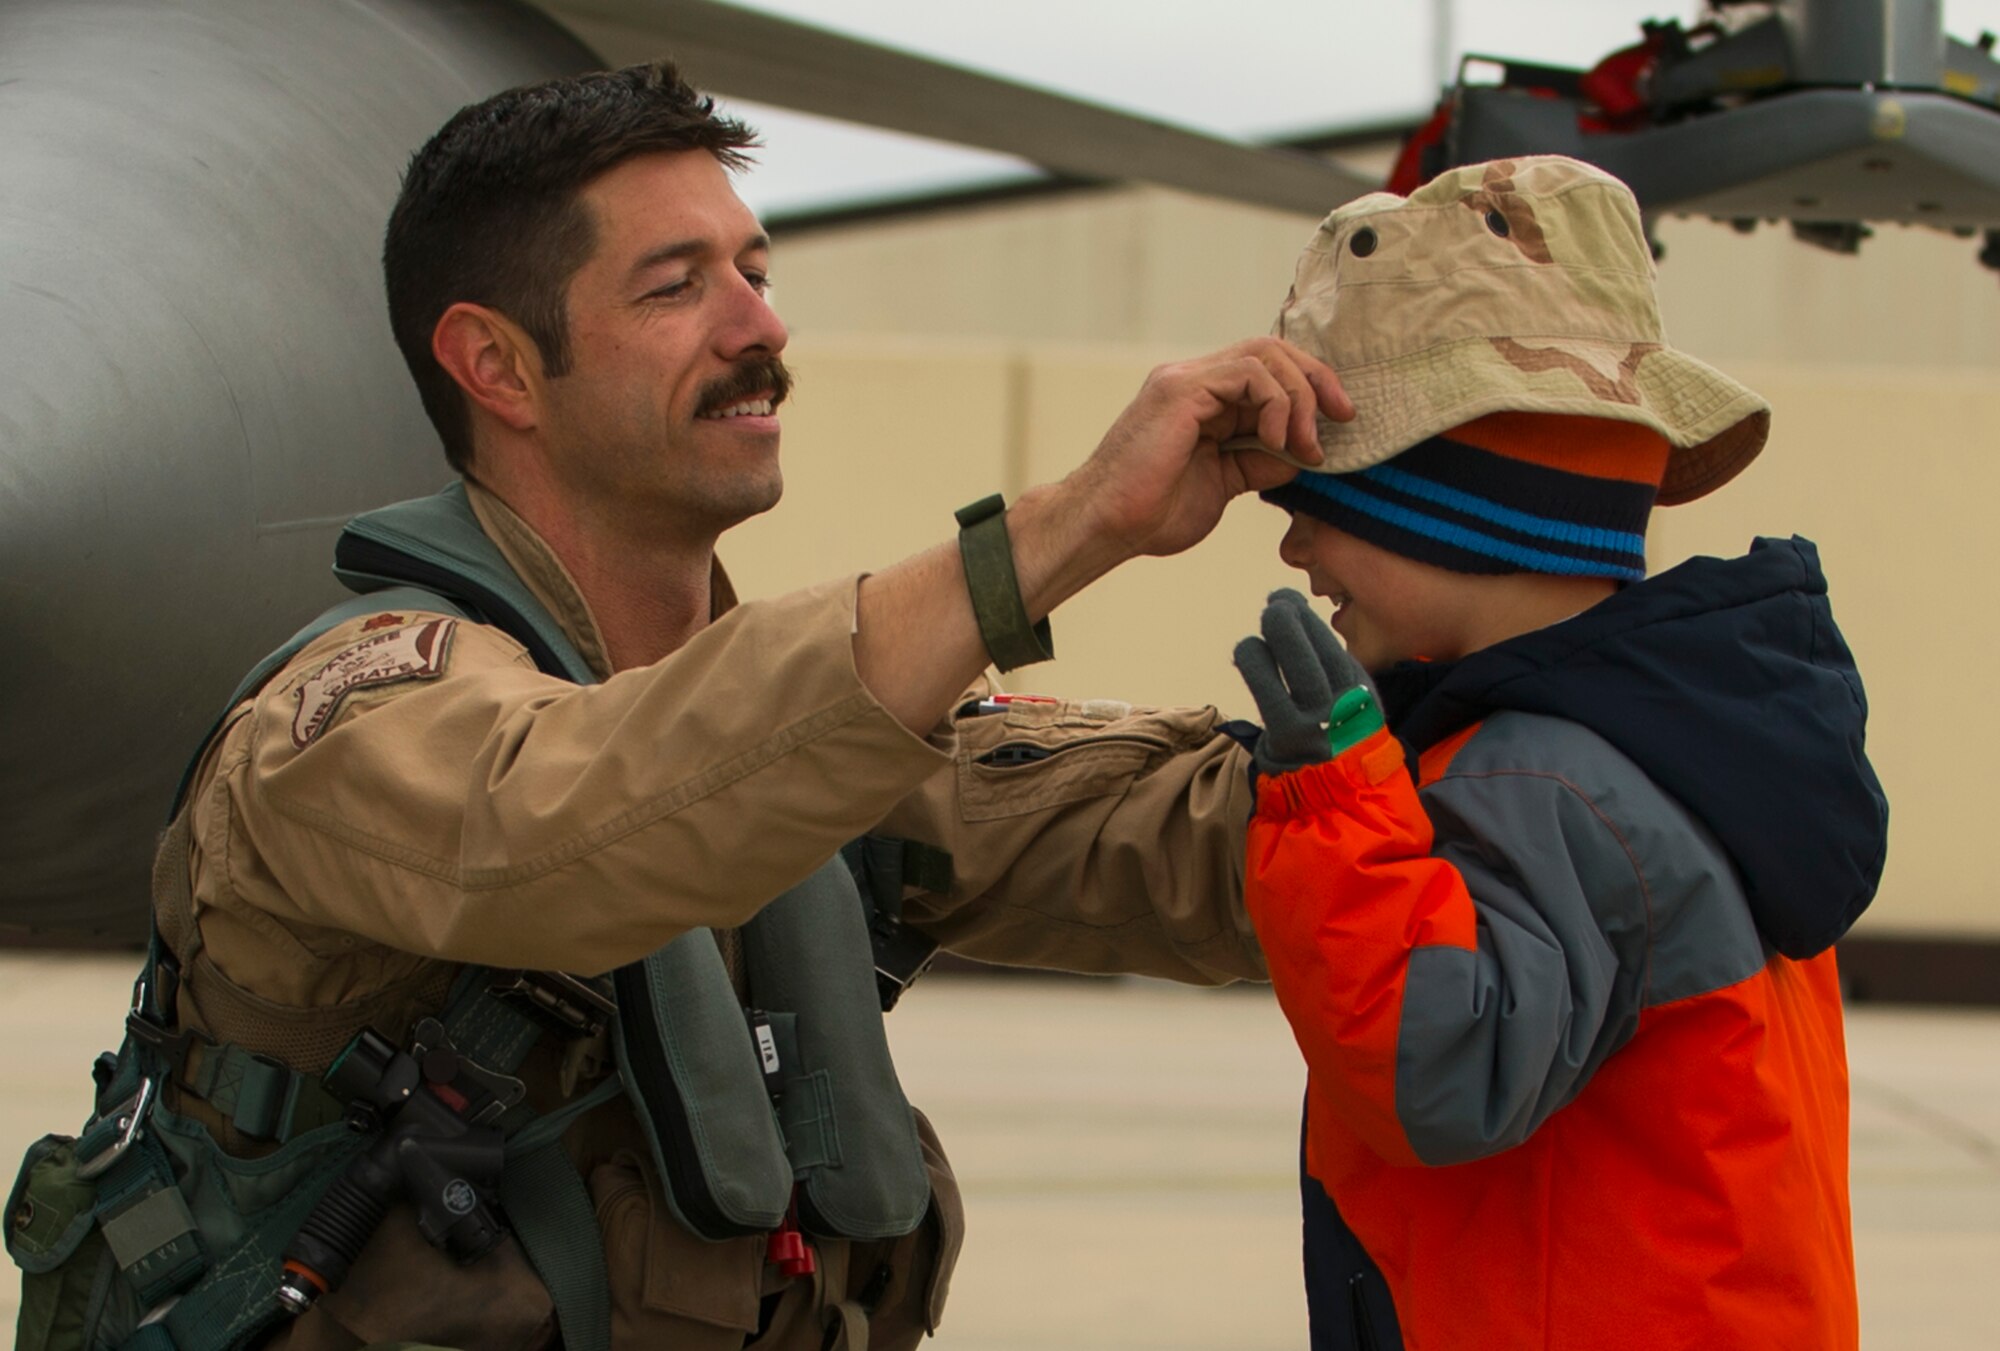 An Airman assigned to the 480th Expeditionary Fighter Squadron places a hat on his son’s head on the flightline at Spangdahlem Air Base, Germany, Oct. 6, 2016. Members of the 480th EFS and supporting agencies deployed to support Operation Inherent Resolve. (U.S. Air Force photo by Senior Airman Dawn M. Weber)